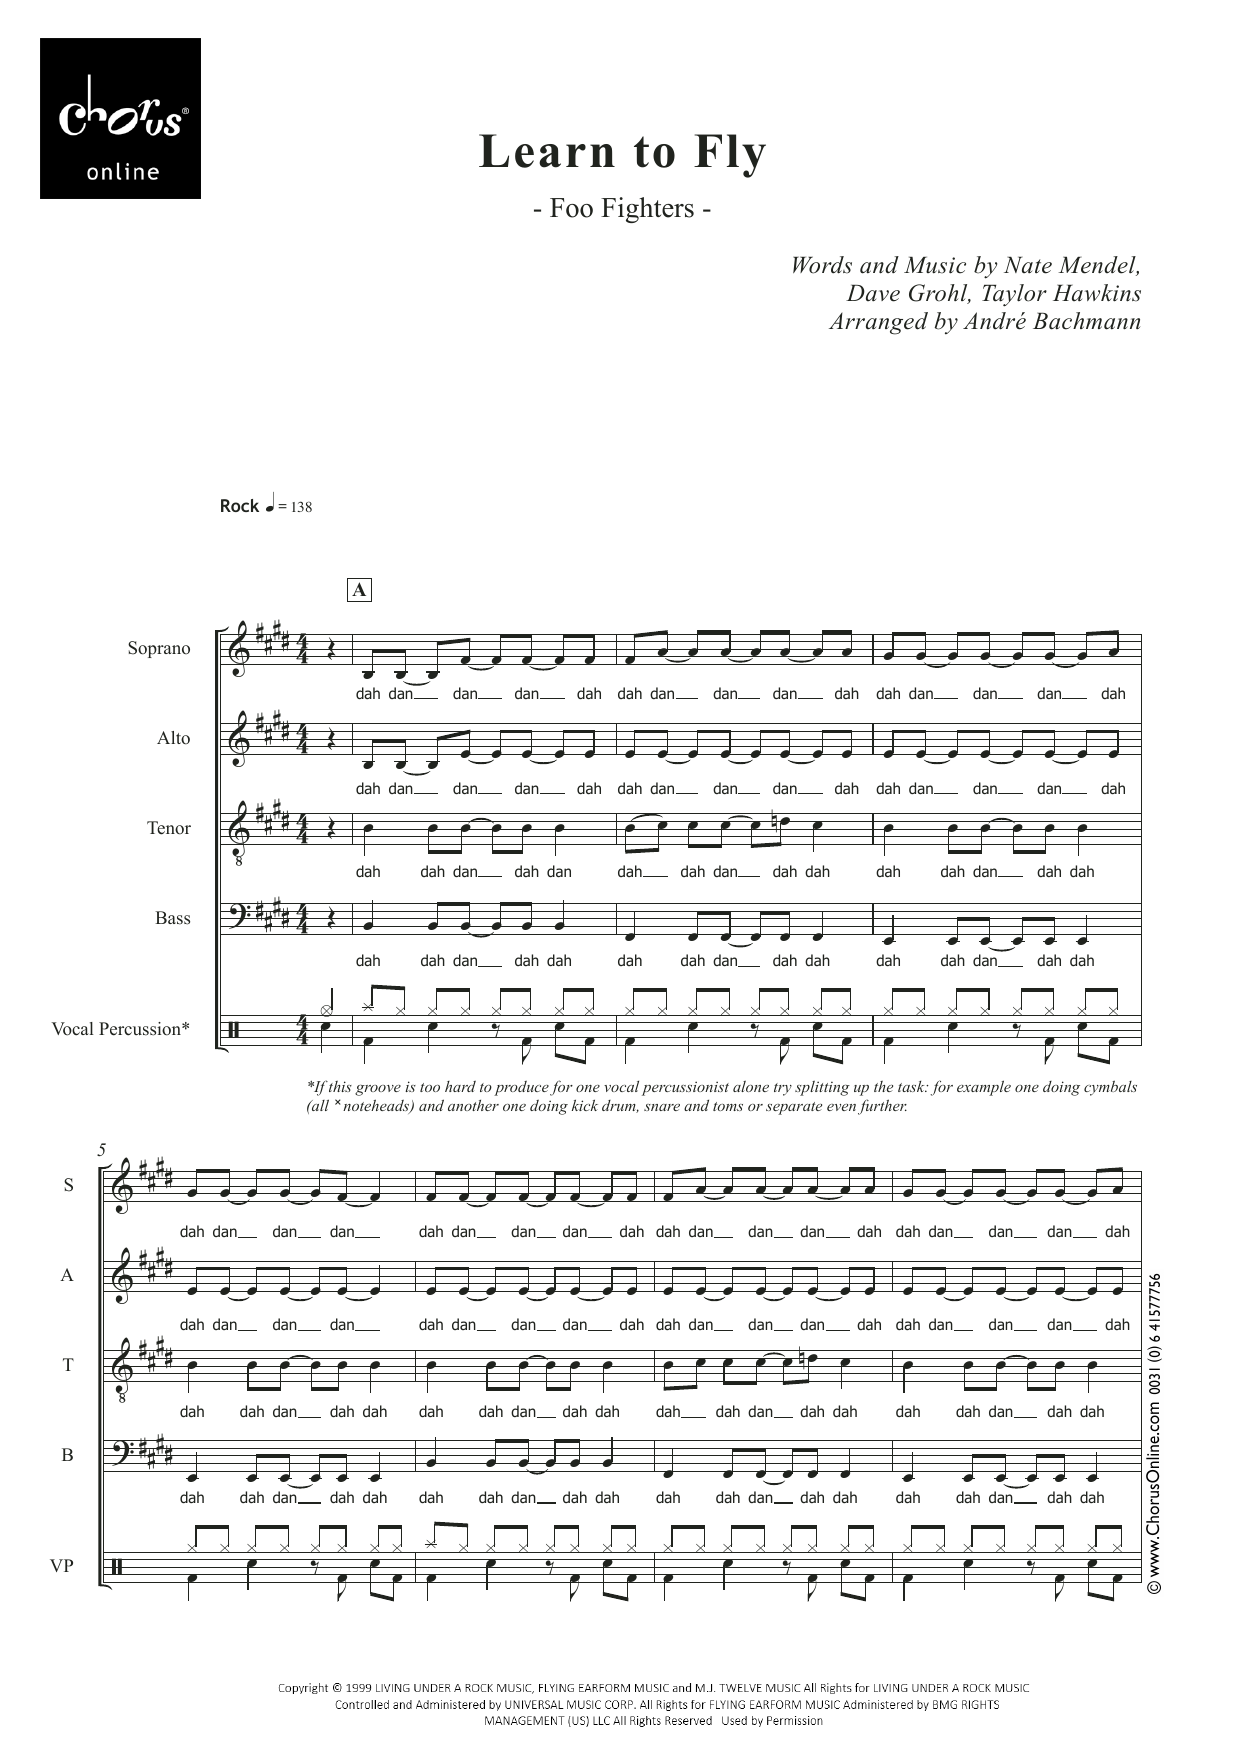 Foo Fighters Learn to Fly (arr. André Bachmann) sheet music notes printable PDF score